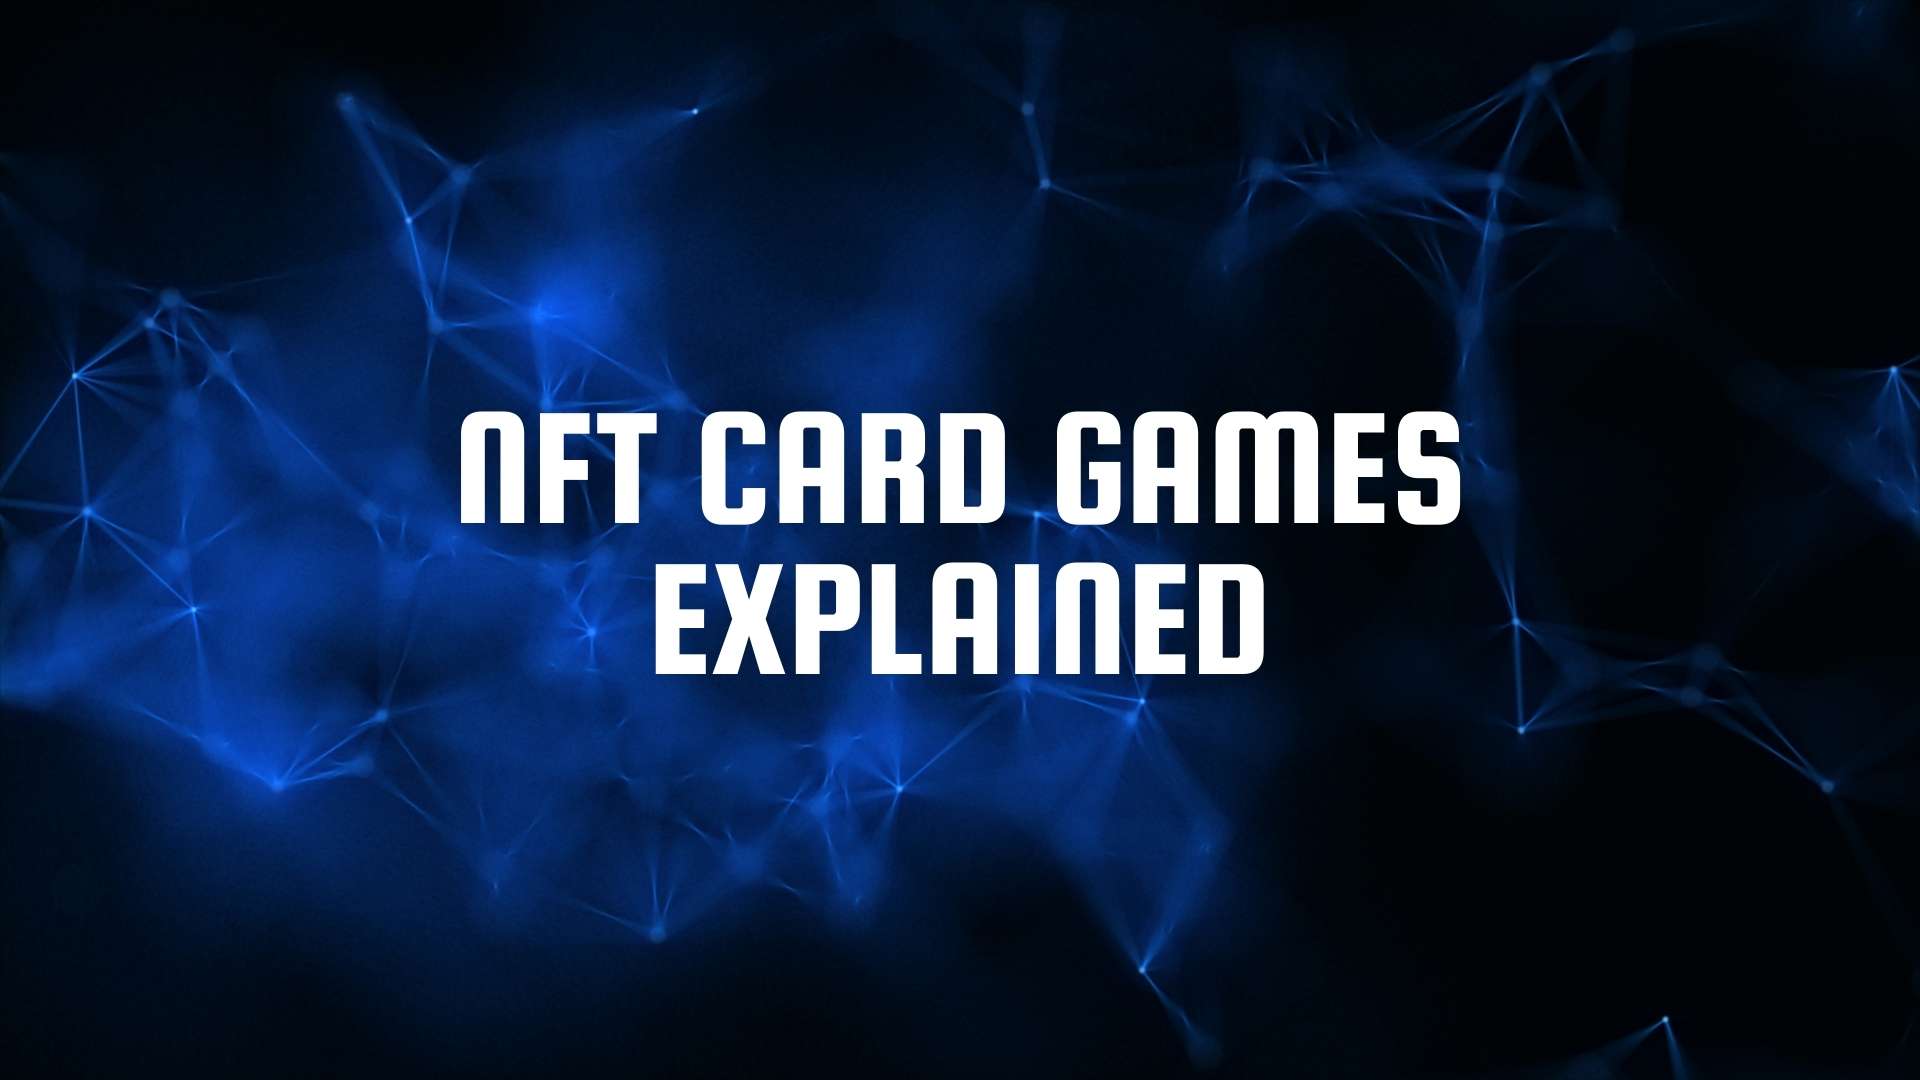 NFT card games explained